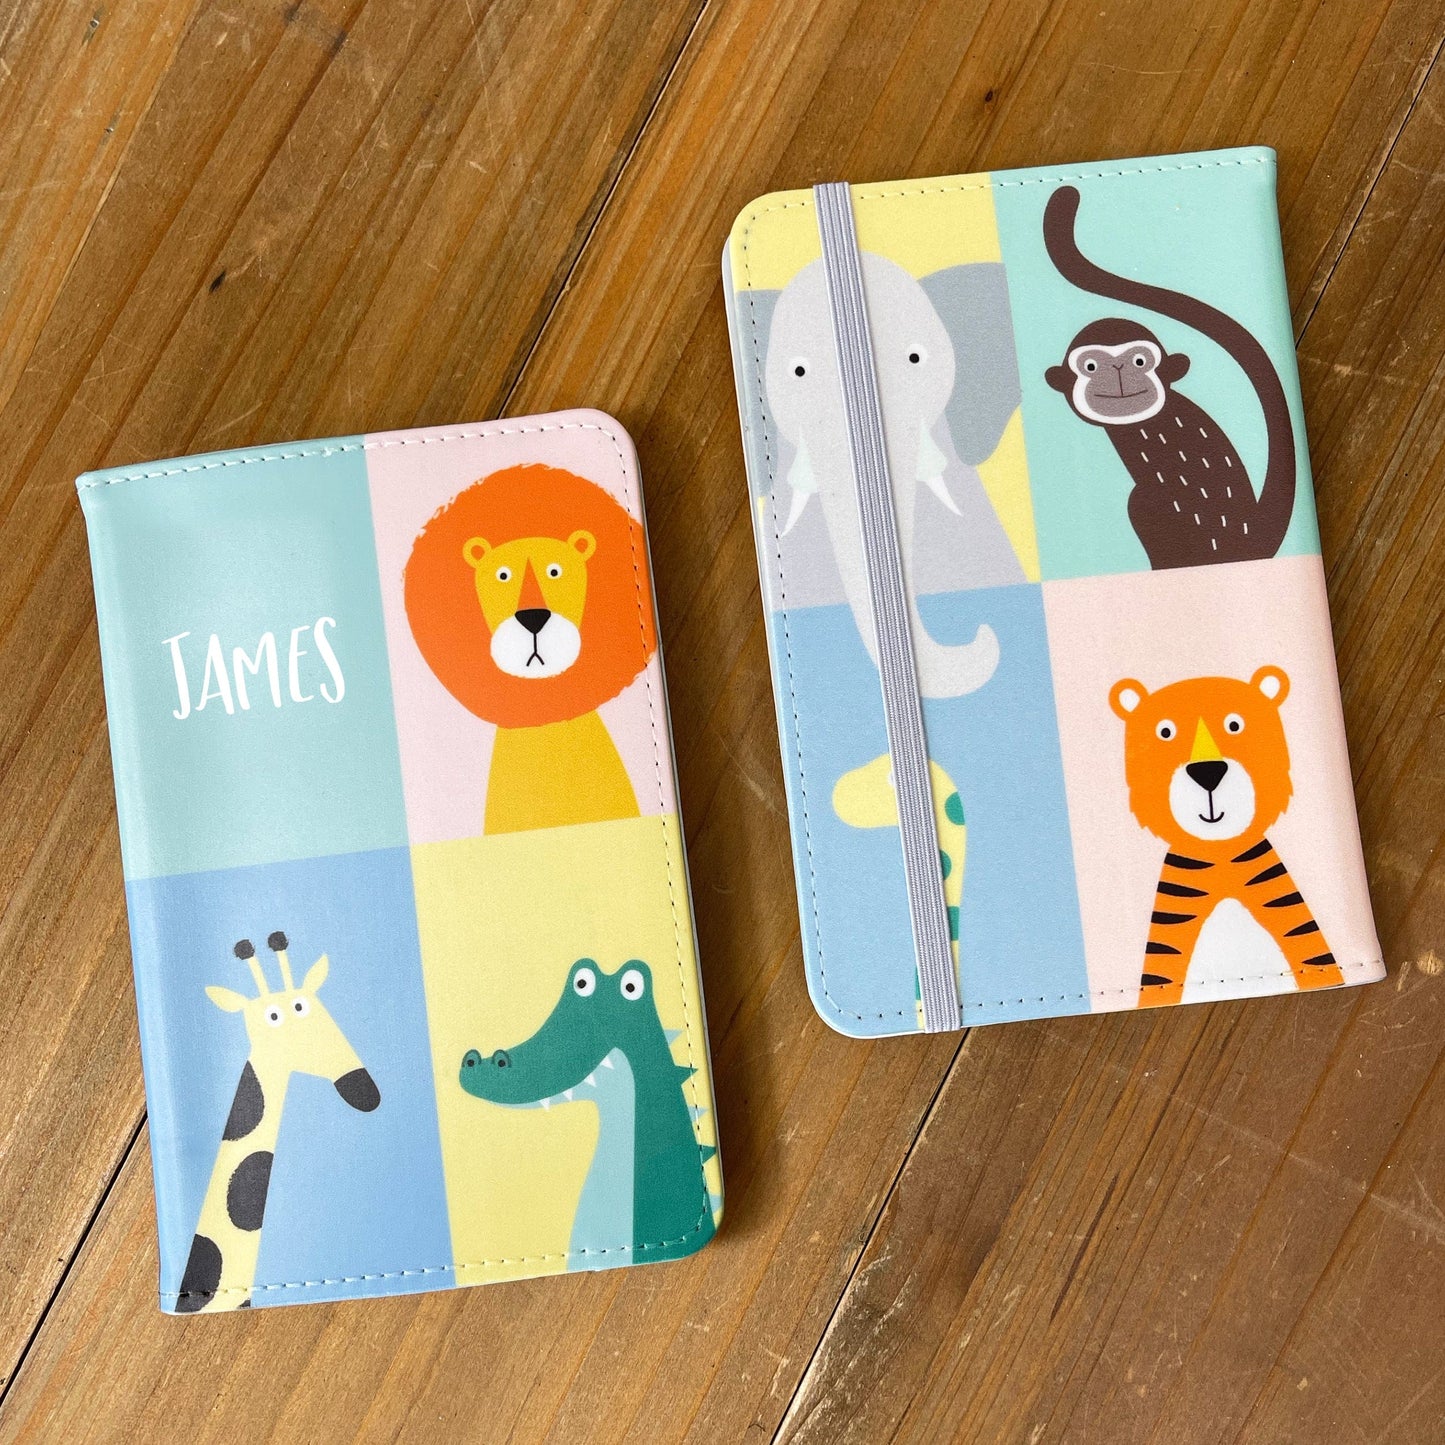 Jungle Animals Print - Passport Photos Cover Personalised With Any Name - Gift For Child Kid Toddler